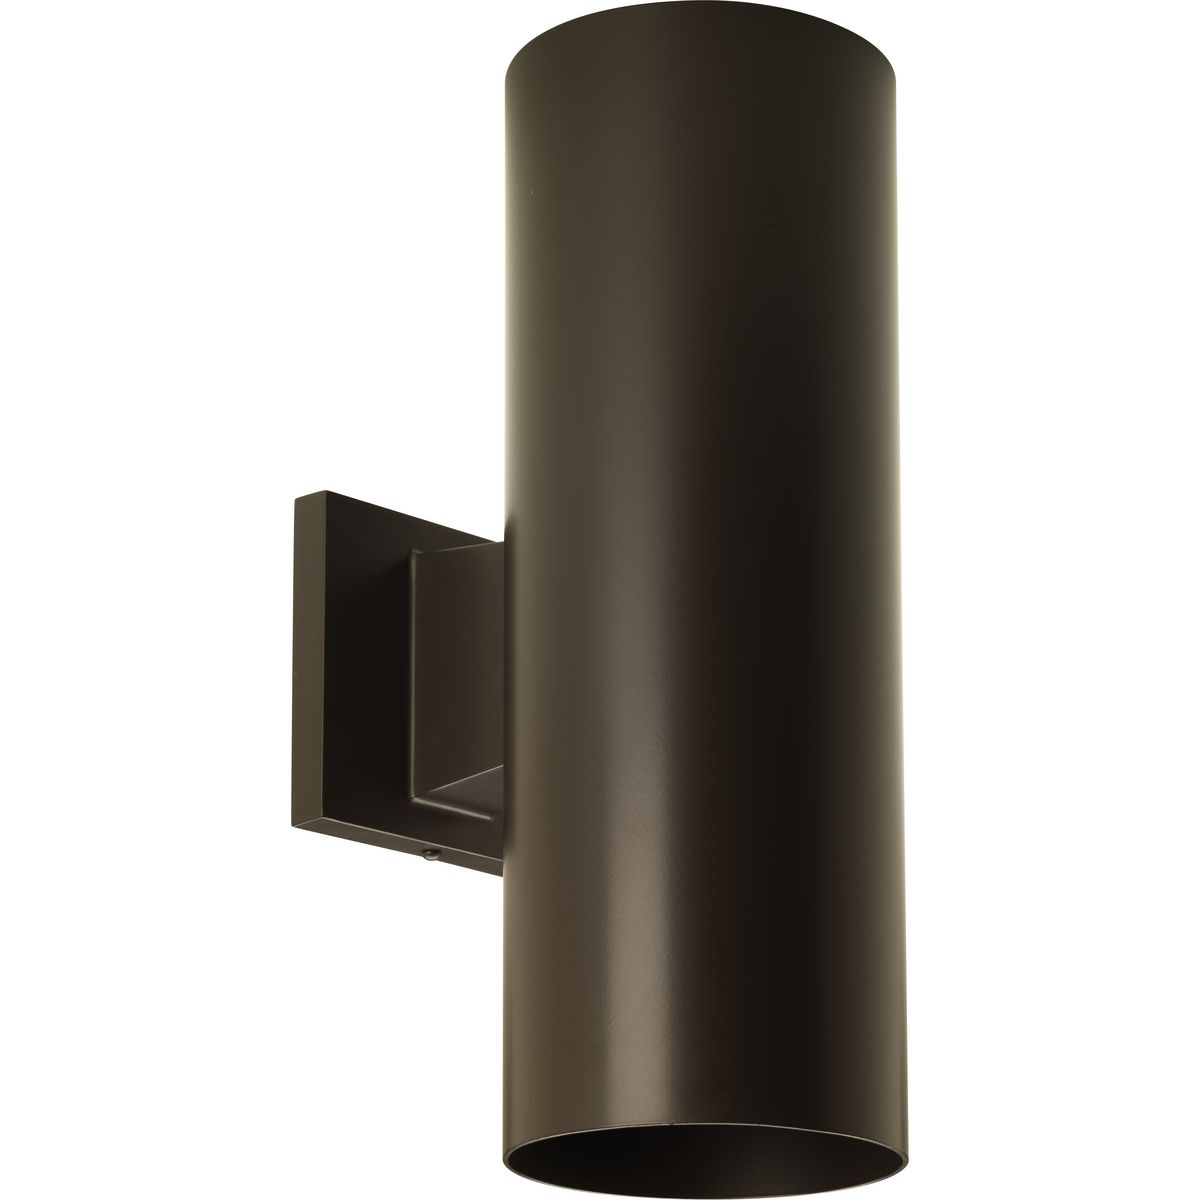 5" LED Outdoor Up/Down Cylinder - Damp Location Listed - Model P5675-20/30K